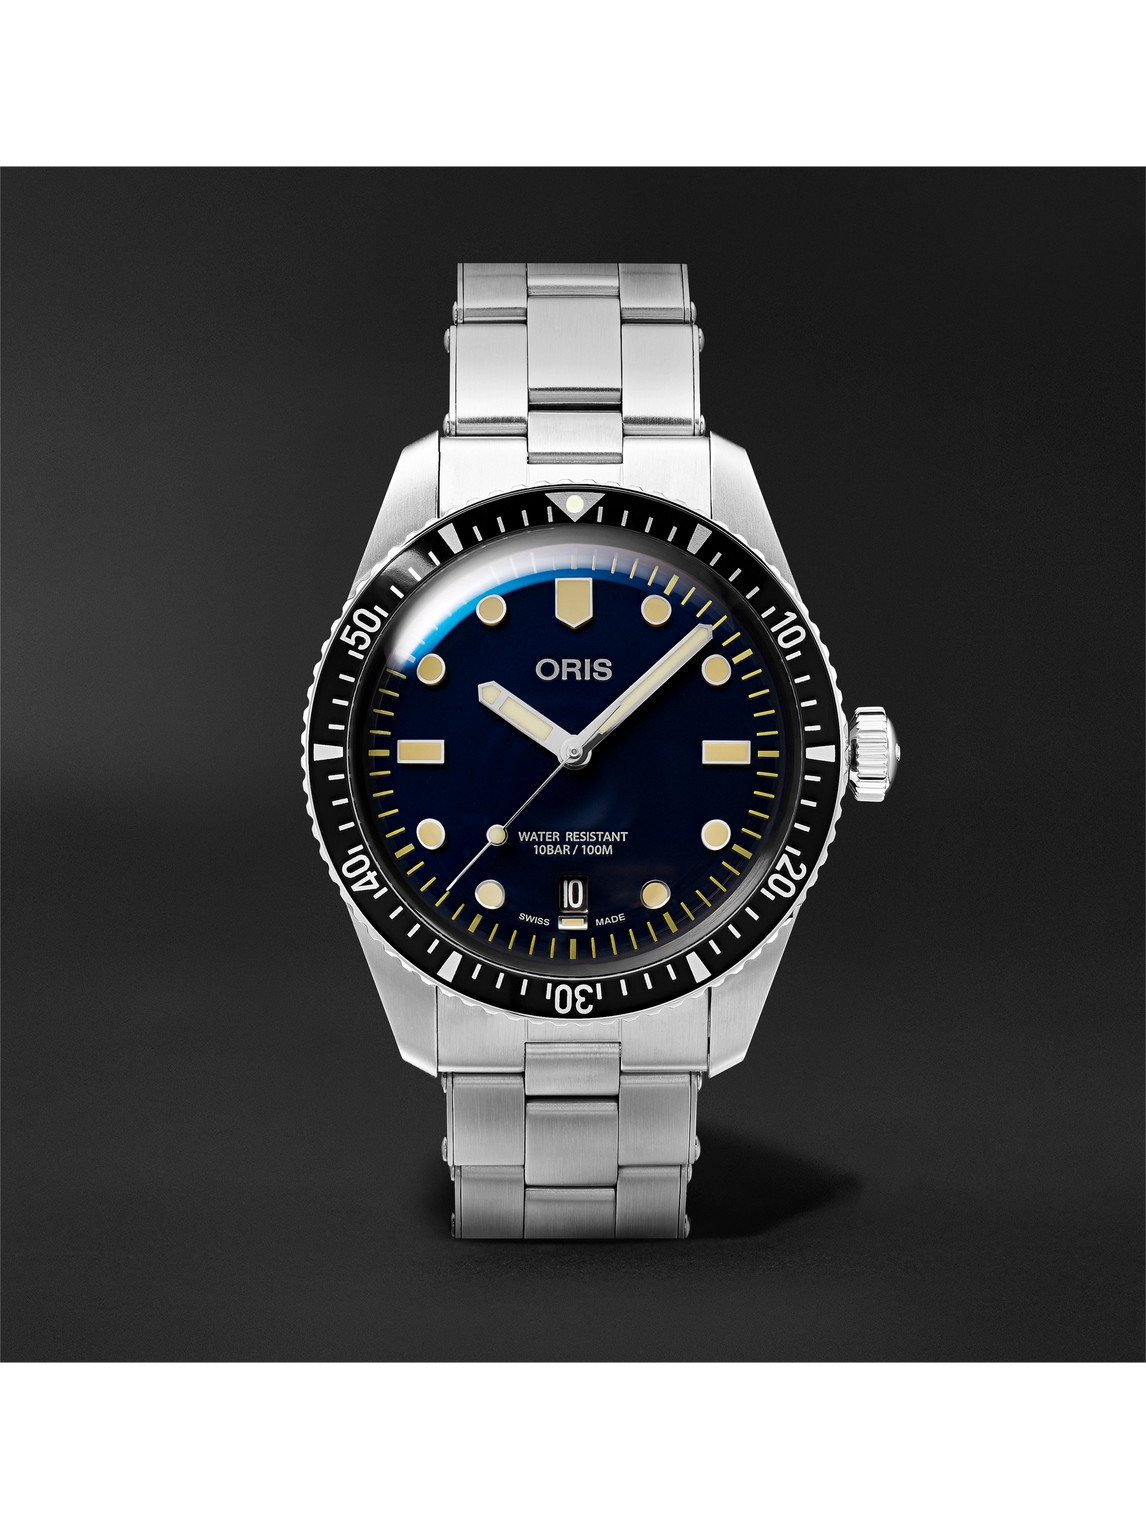 Divers Sixty-Five Automatic 40mm Stainless Steel Watch, Ref. No. 01 733 7707 4055-07 8 20 18